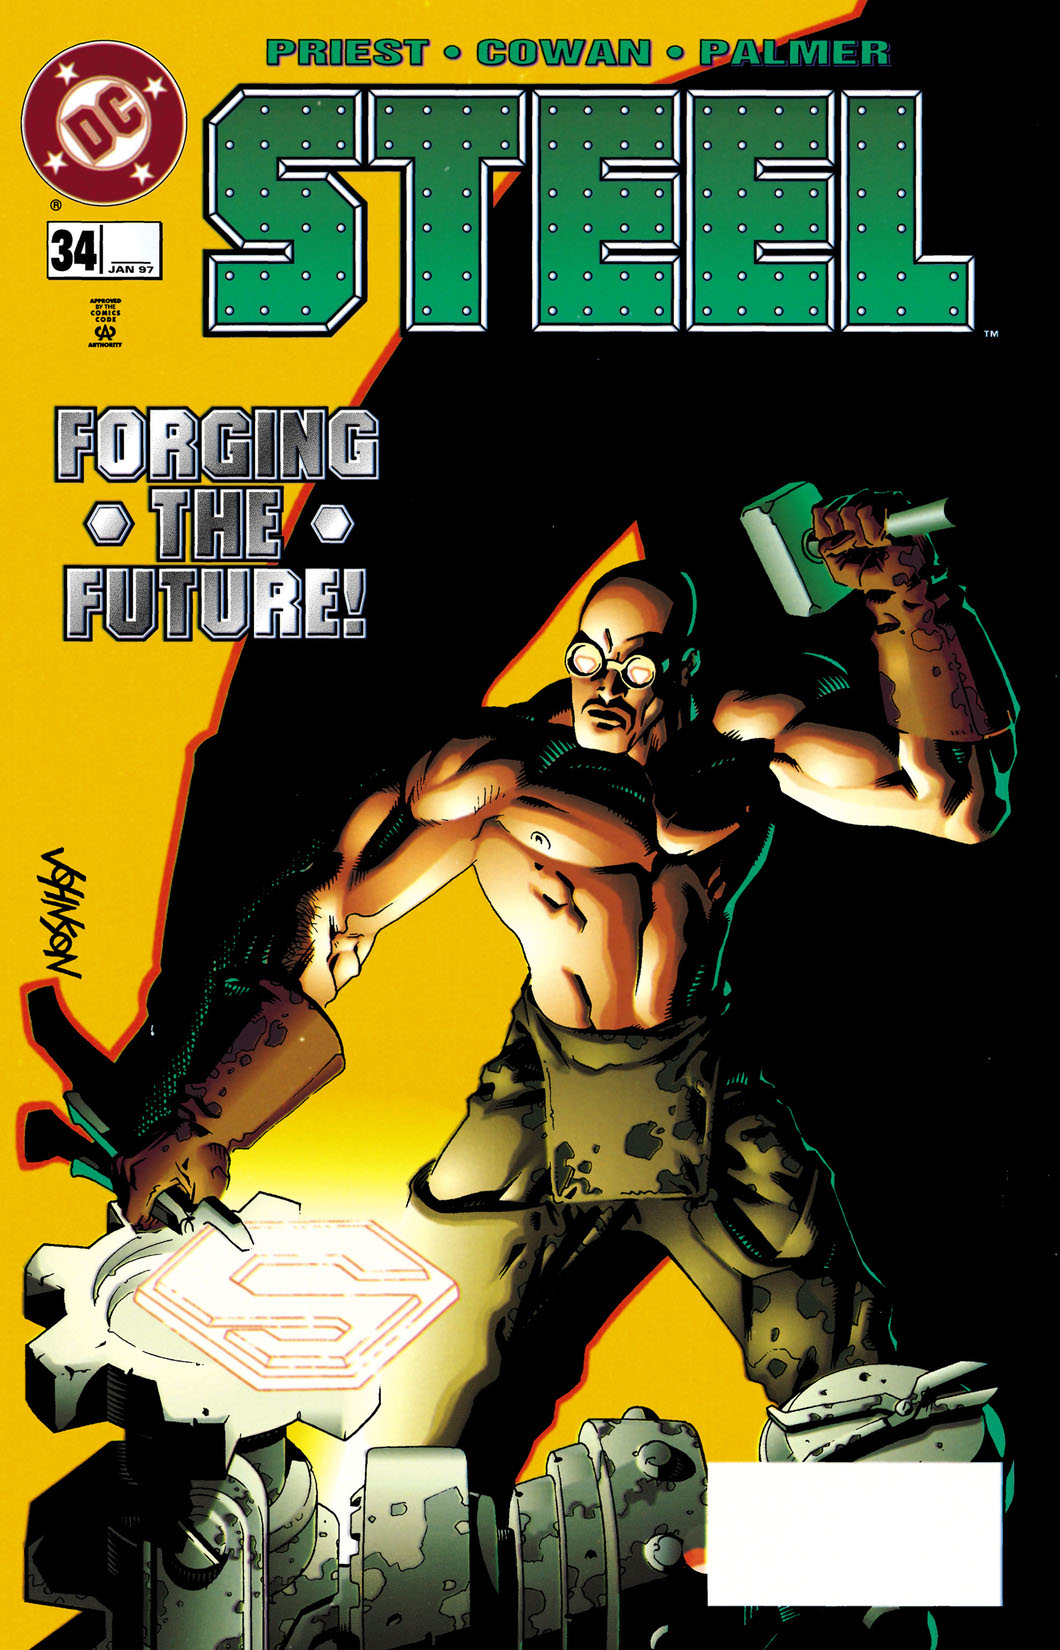 Steel (1994-) #34 preview images